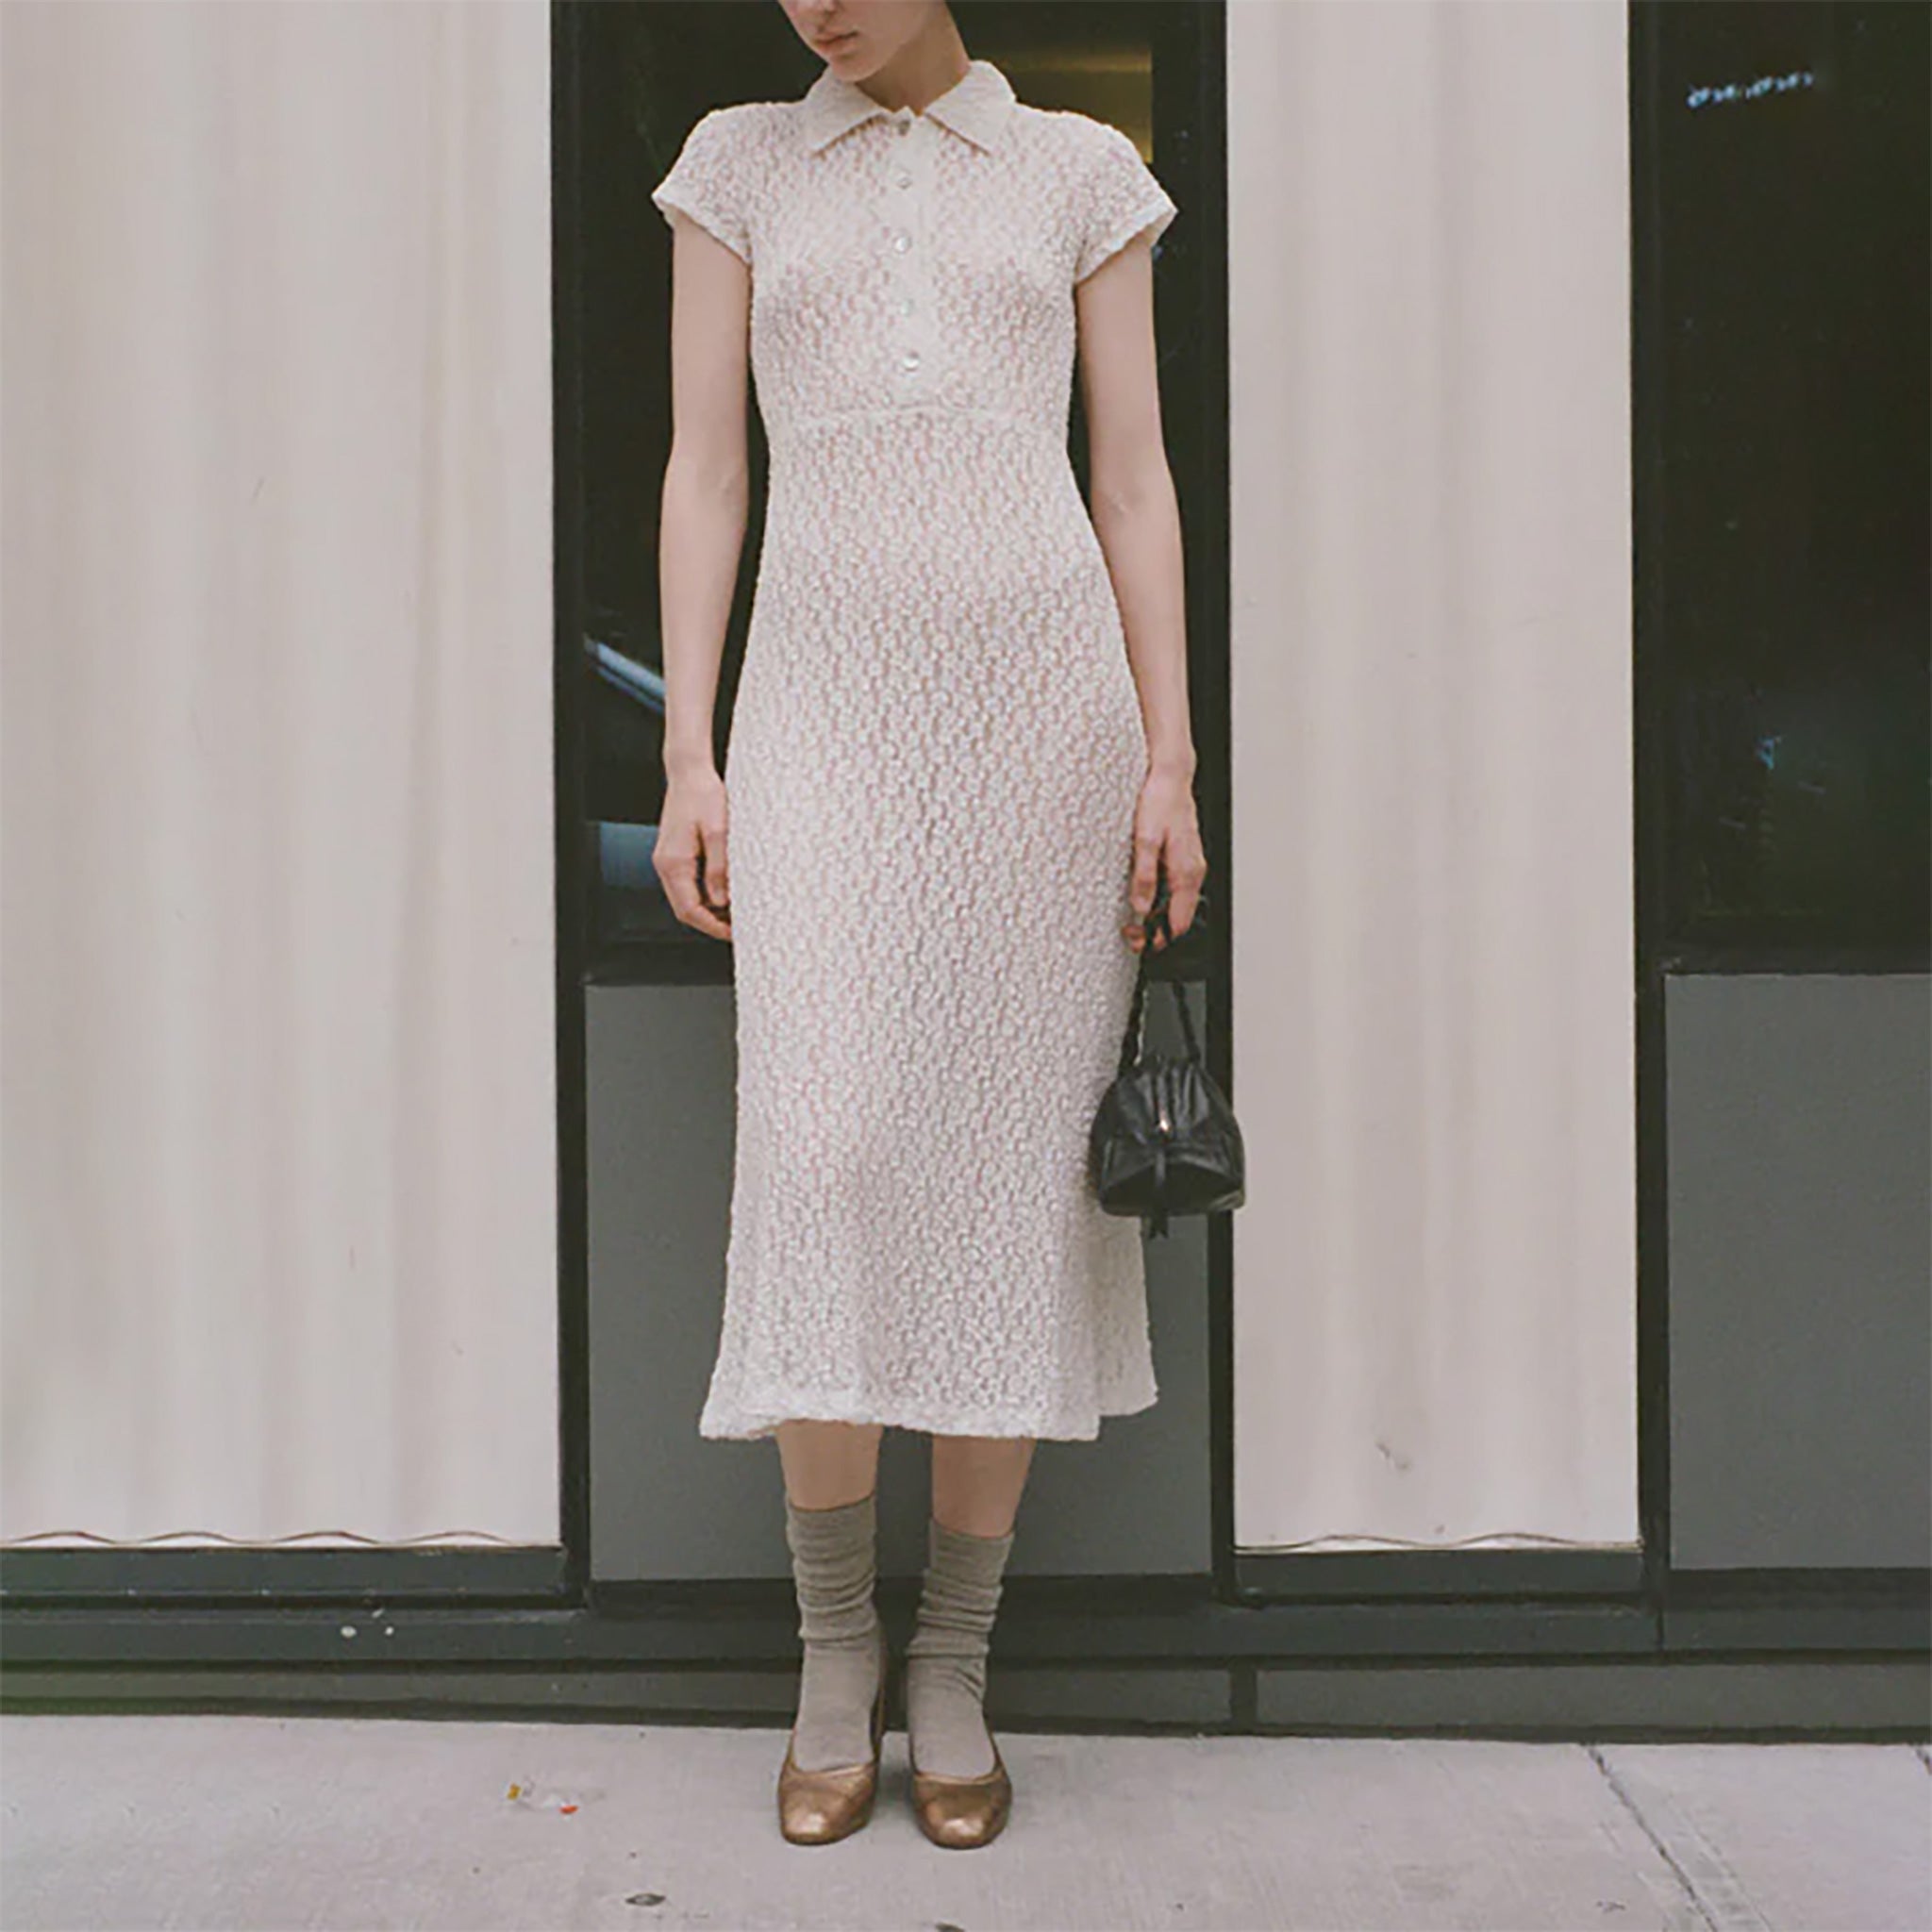 Full body photo of model standing in the street wearing the Choice Dress - Ivory.